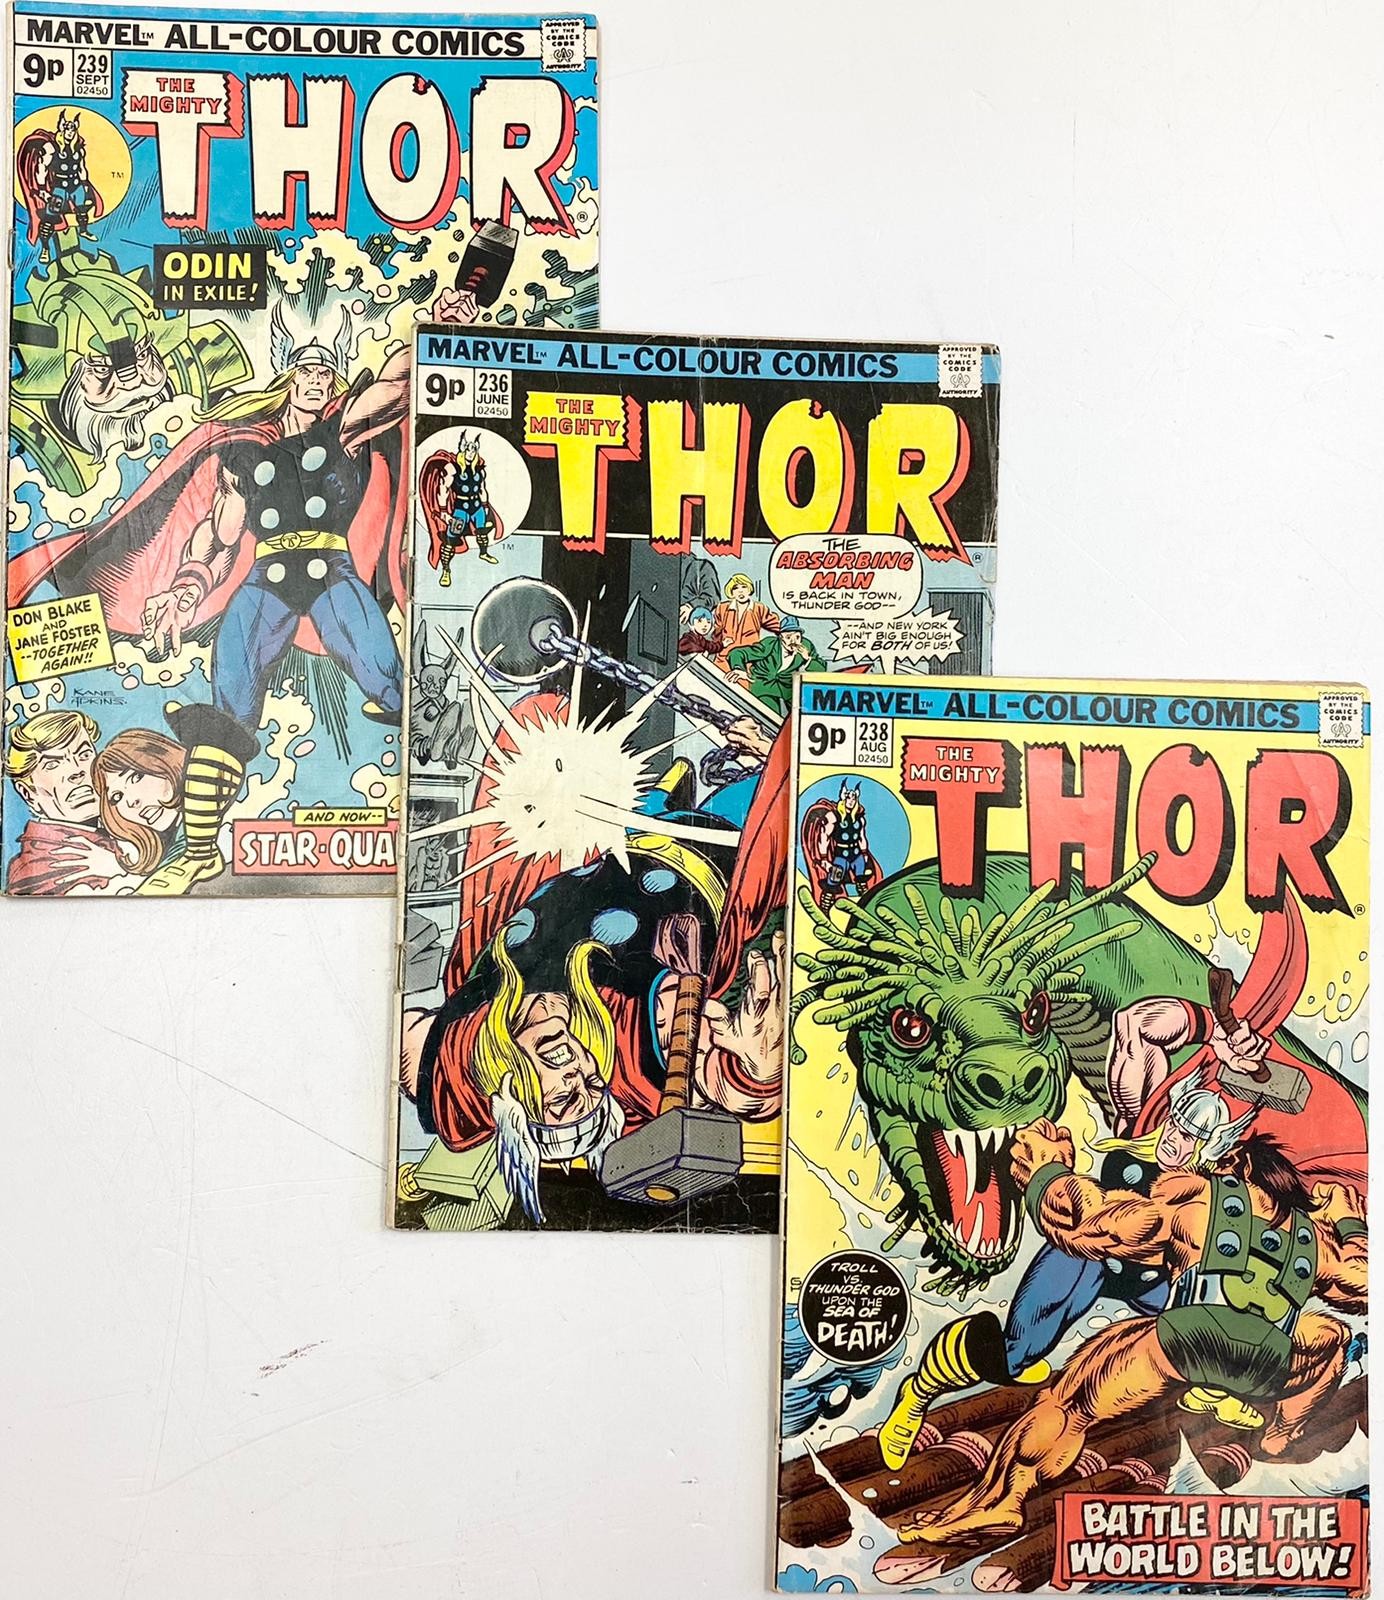 6 editions of Vintage Marvel 'The Mighty Thor' comics. - Image 2 of 3